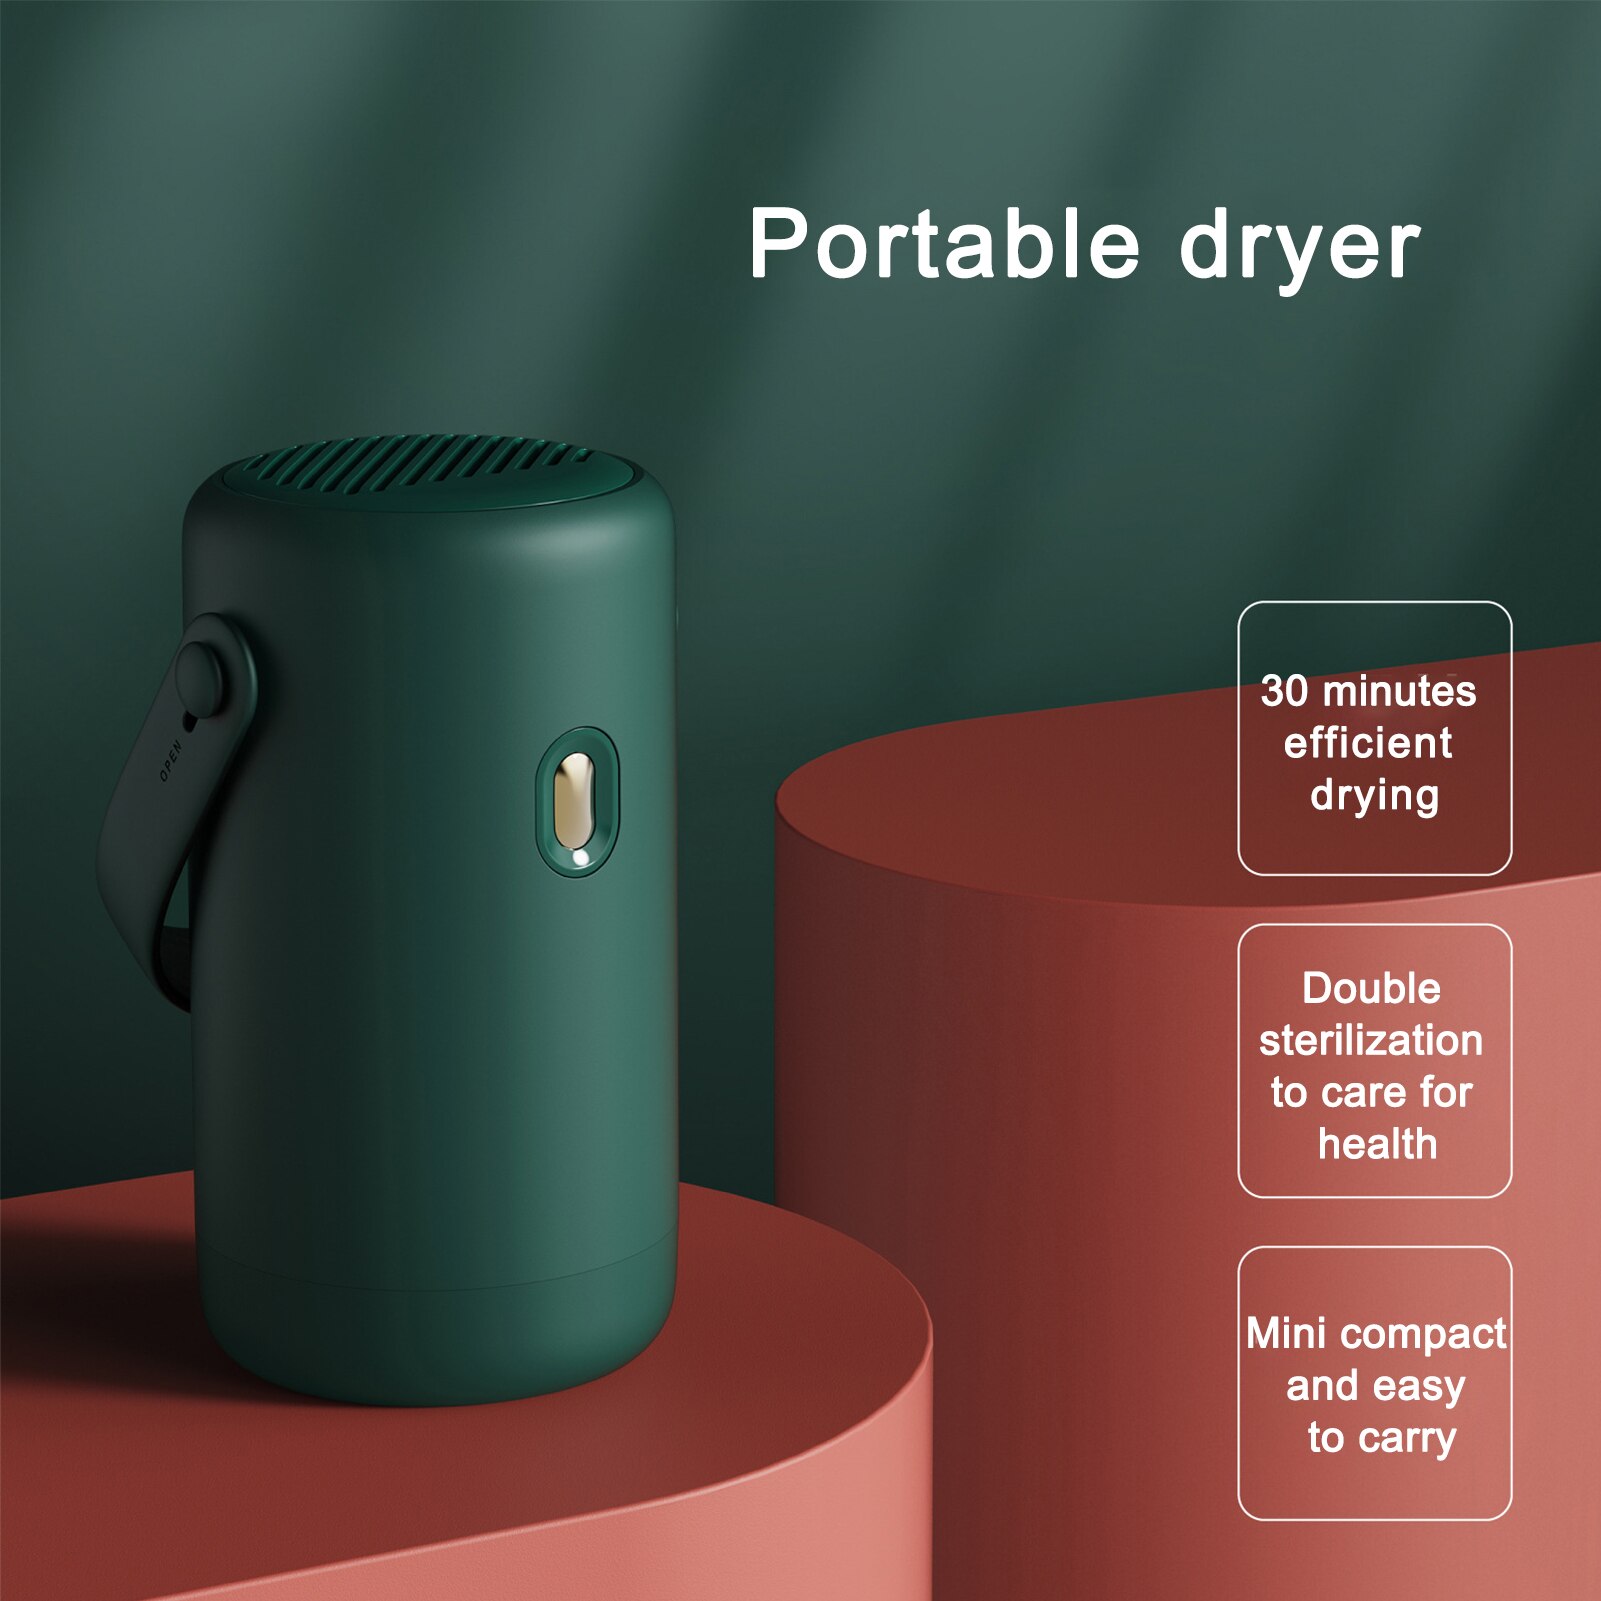 Portable Clothes Dryer Mini Clothing Automatic Dryer With Auto Shutoff Compact Indoor Dryer One Key Control Travel Socks Dryer